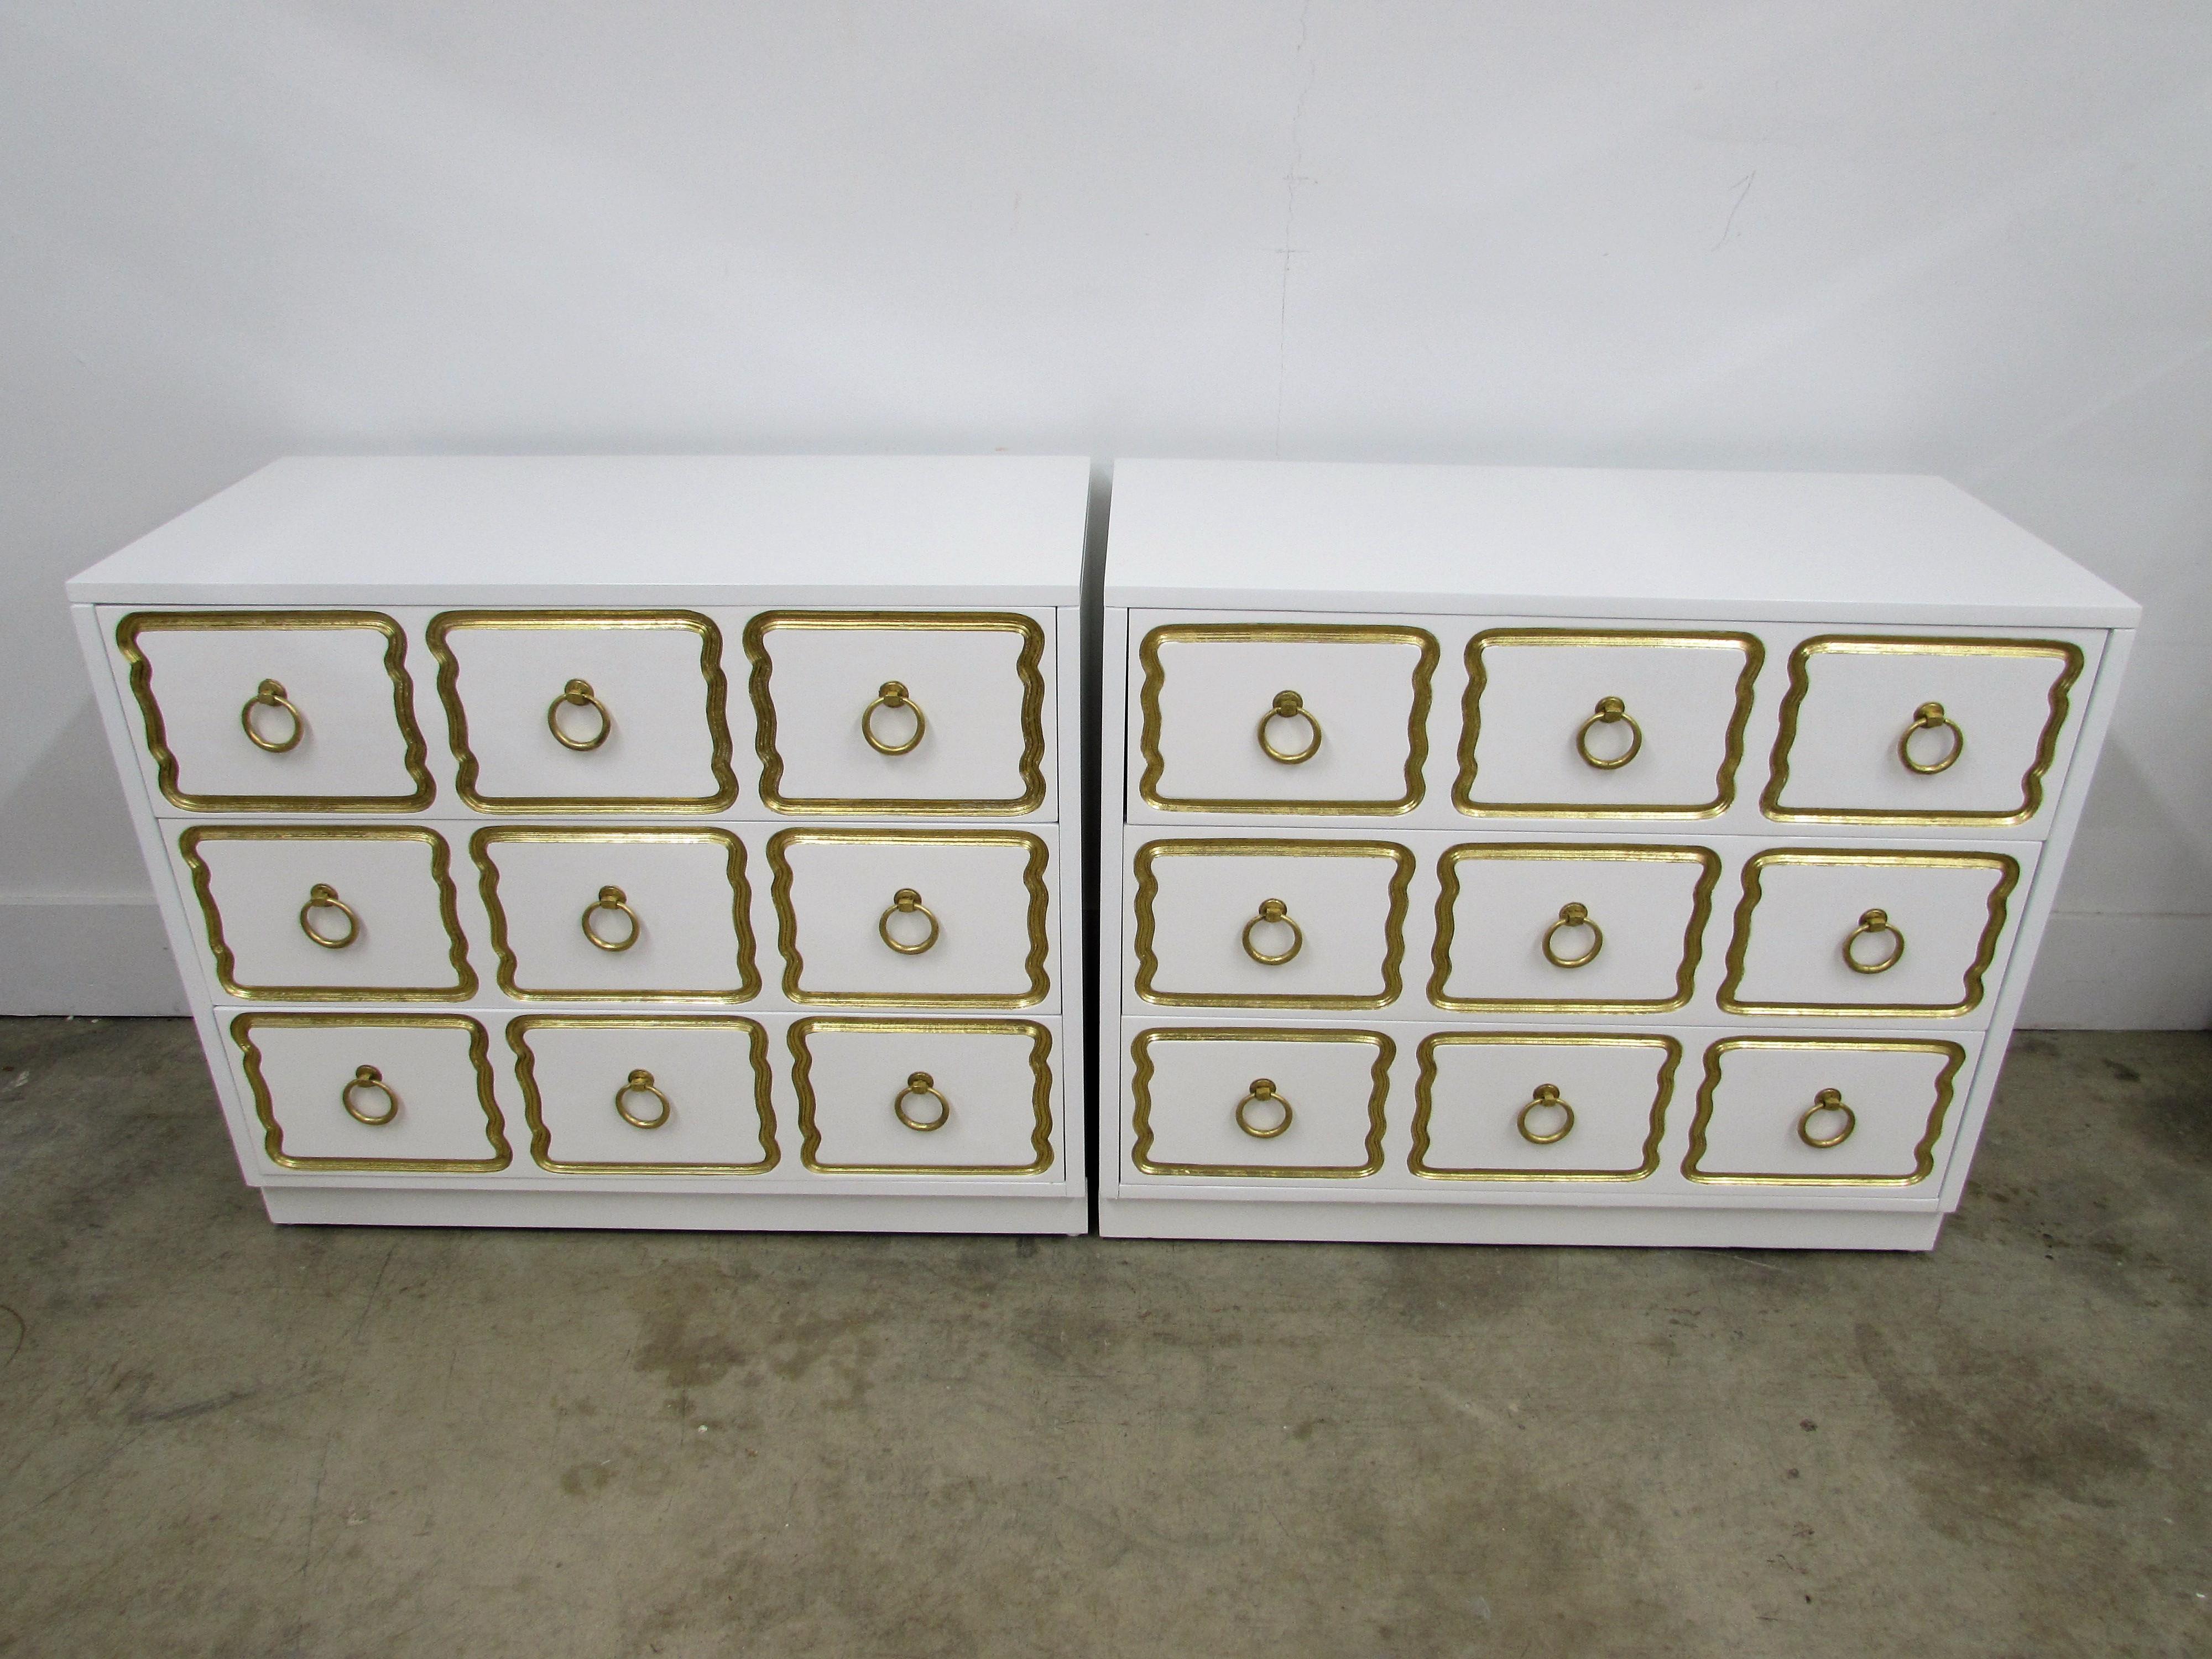 Pair of chests in the manner of Dorothy Draper España Collection for Heritage customized by our In-house Lacquer Studio in Alabaster white with original brass ring pulls and iconic incised framing in hand-applied gold leaf.